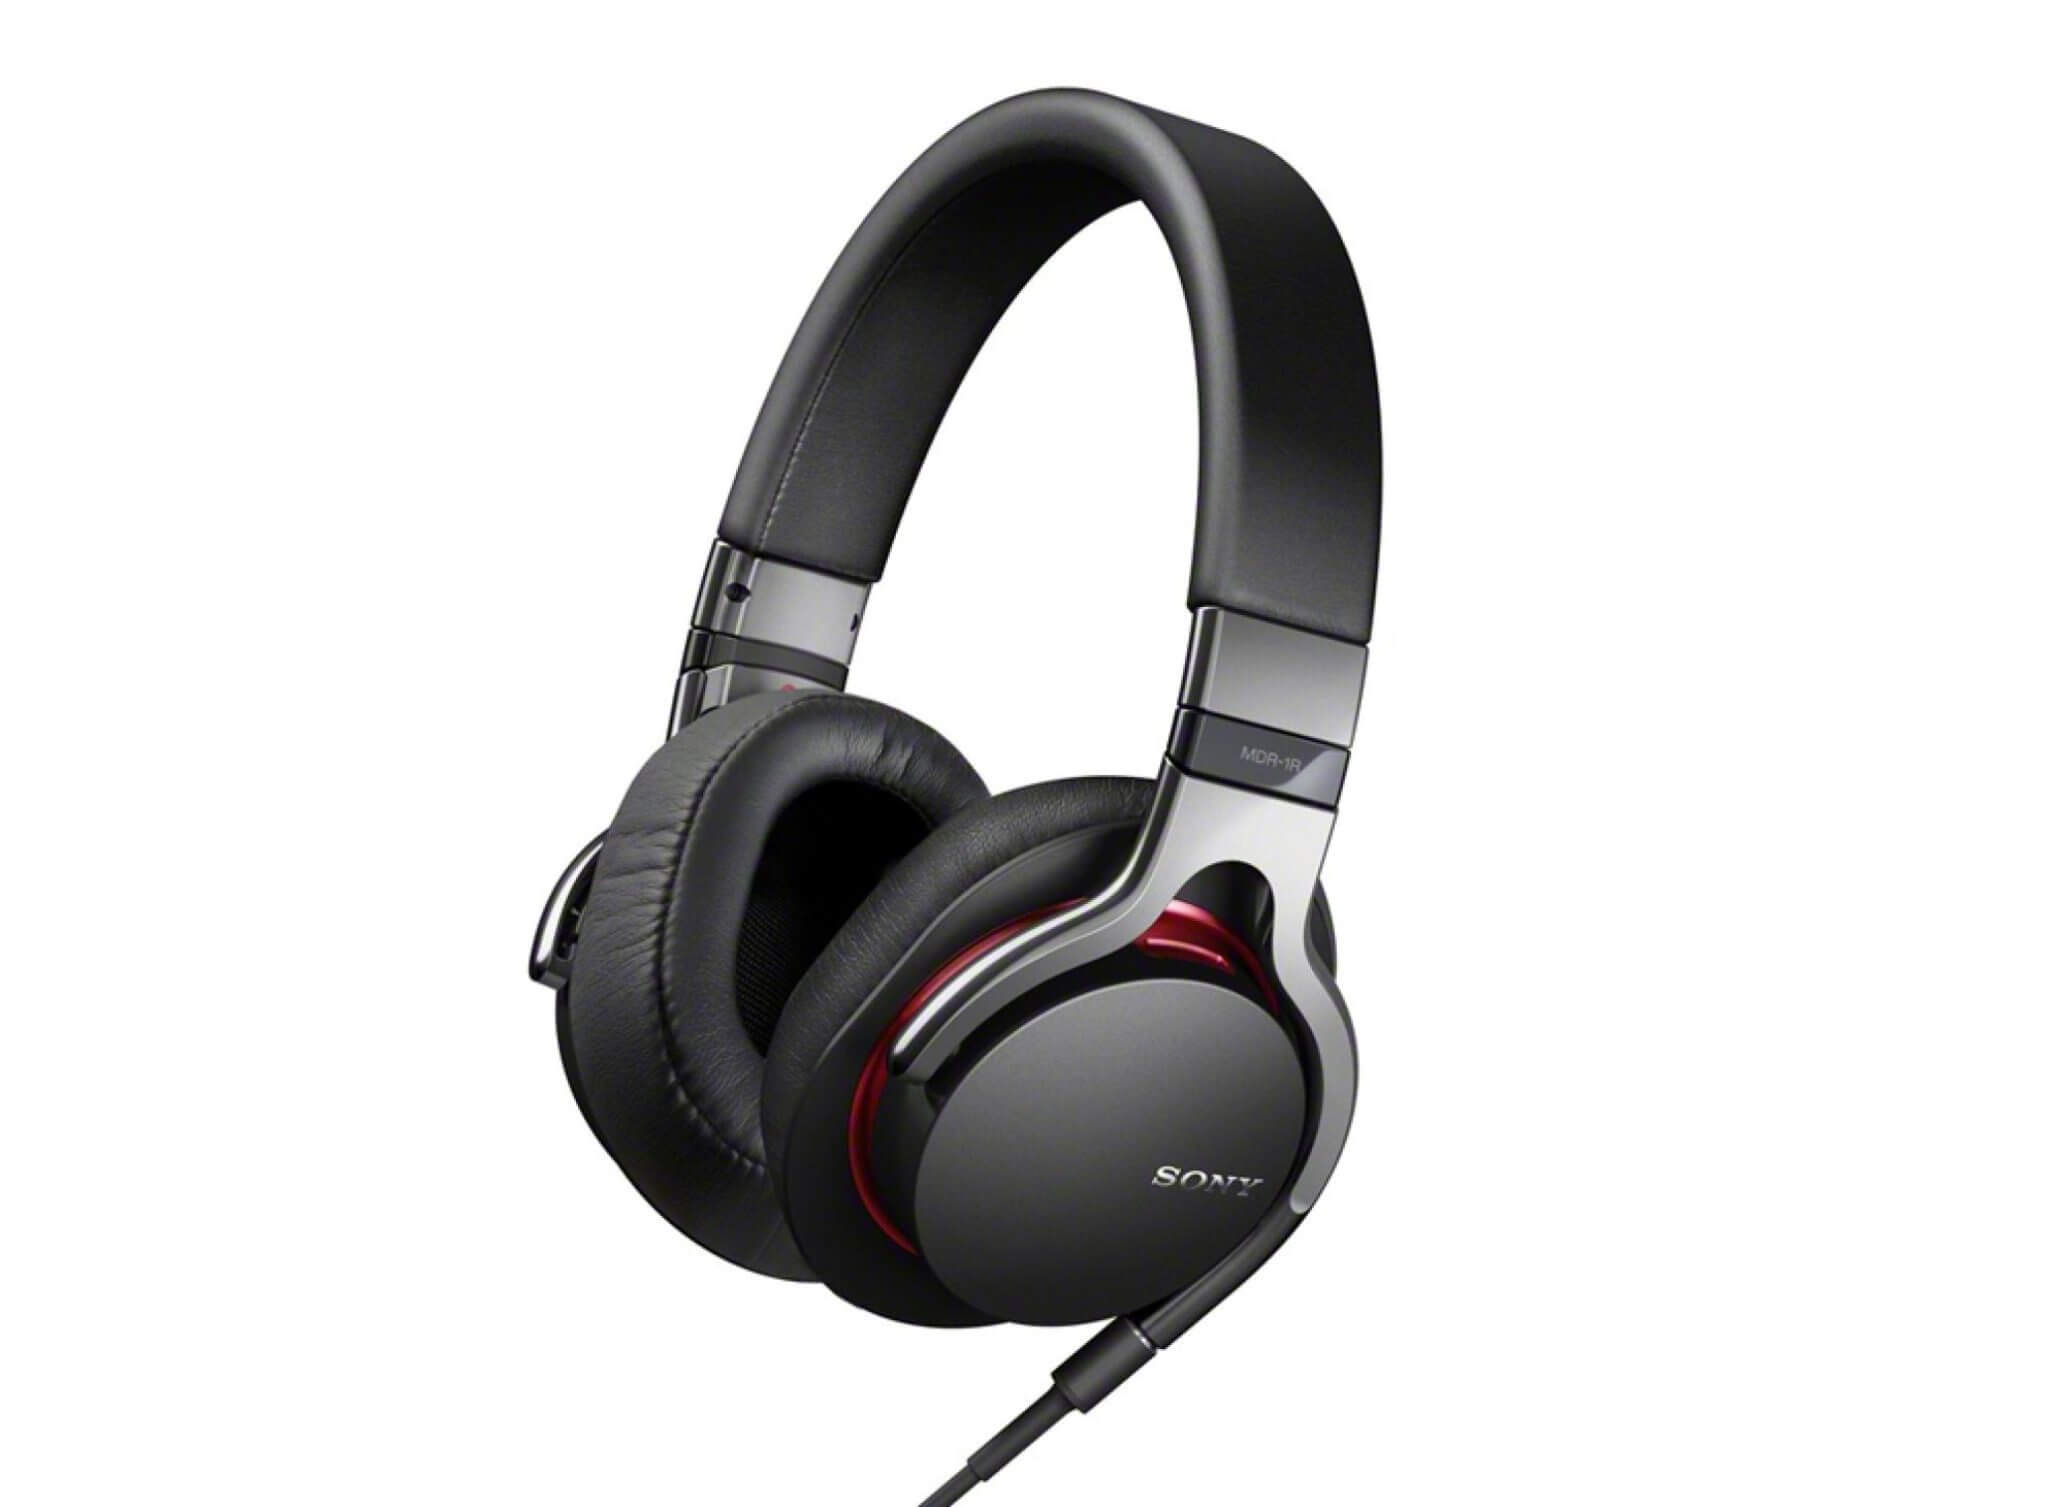 00rFpS3aEdhBCVIhUkisHQ6 3.fit scale.size 2698x1517 scaled » best dj headphones